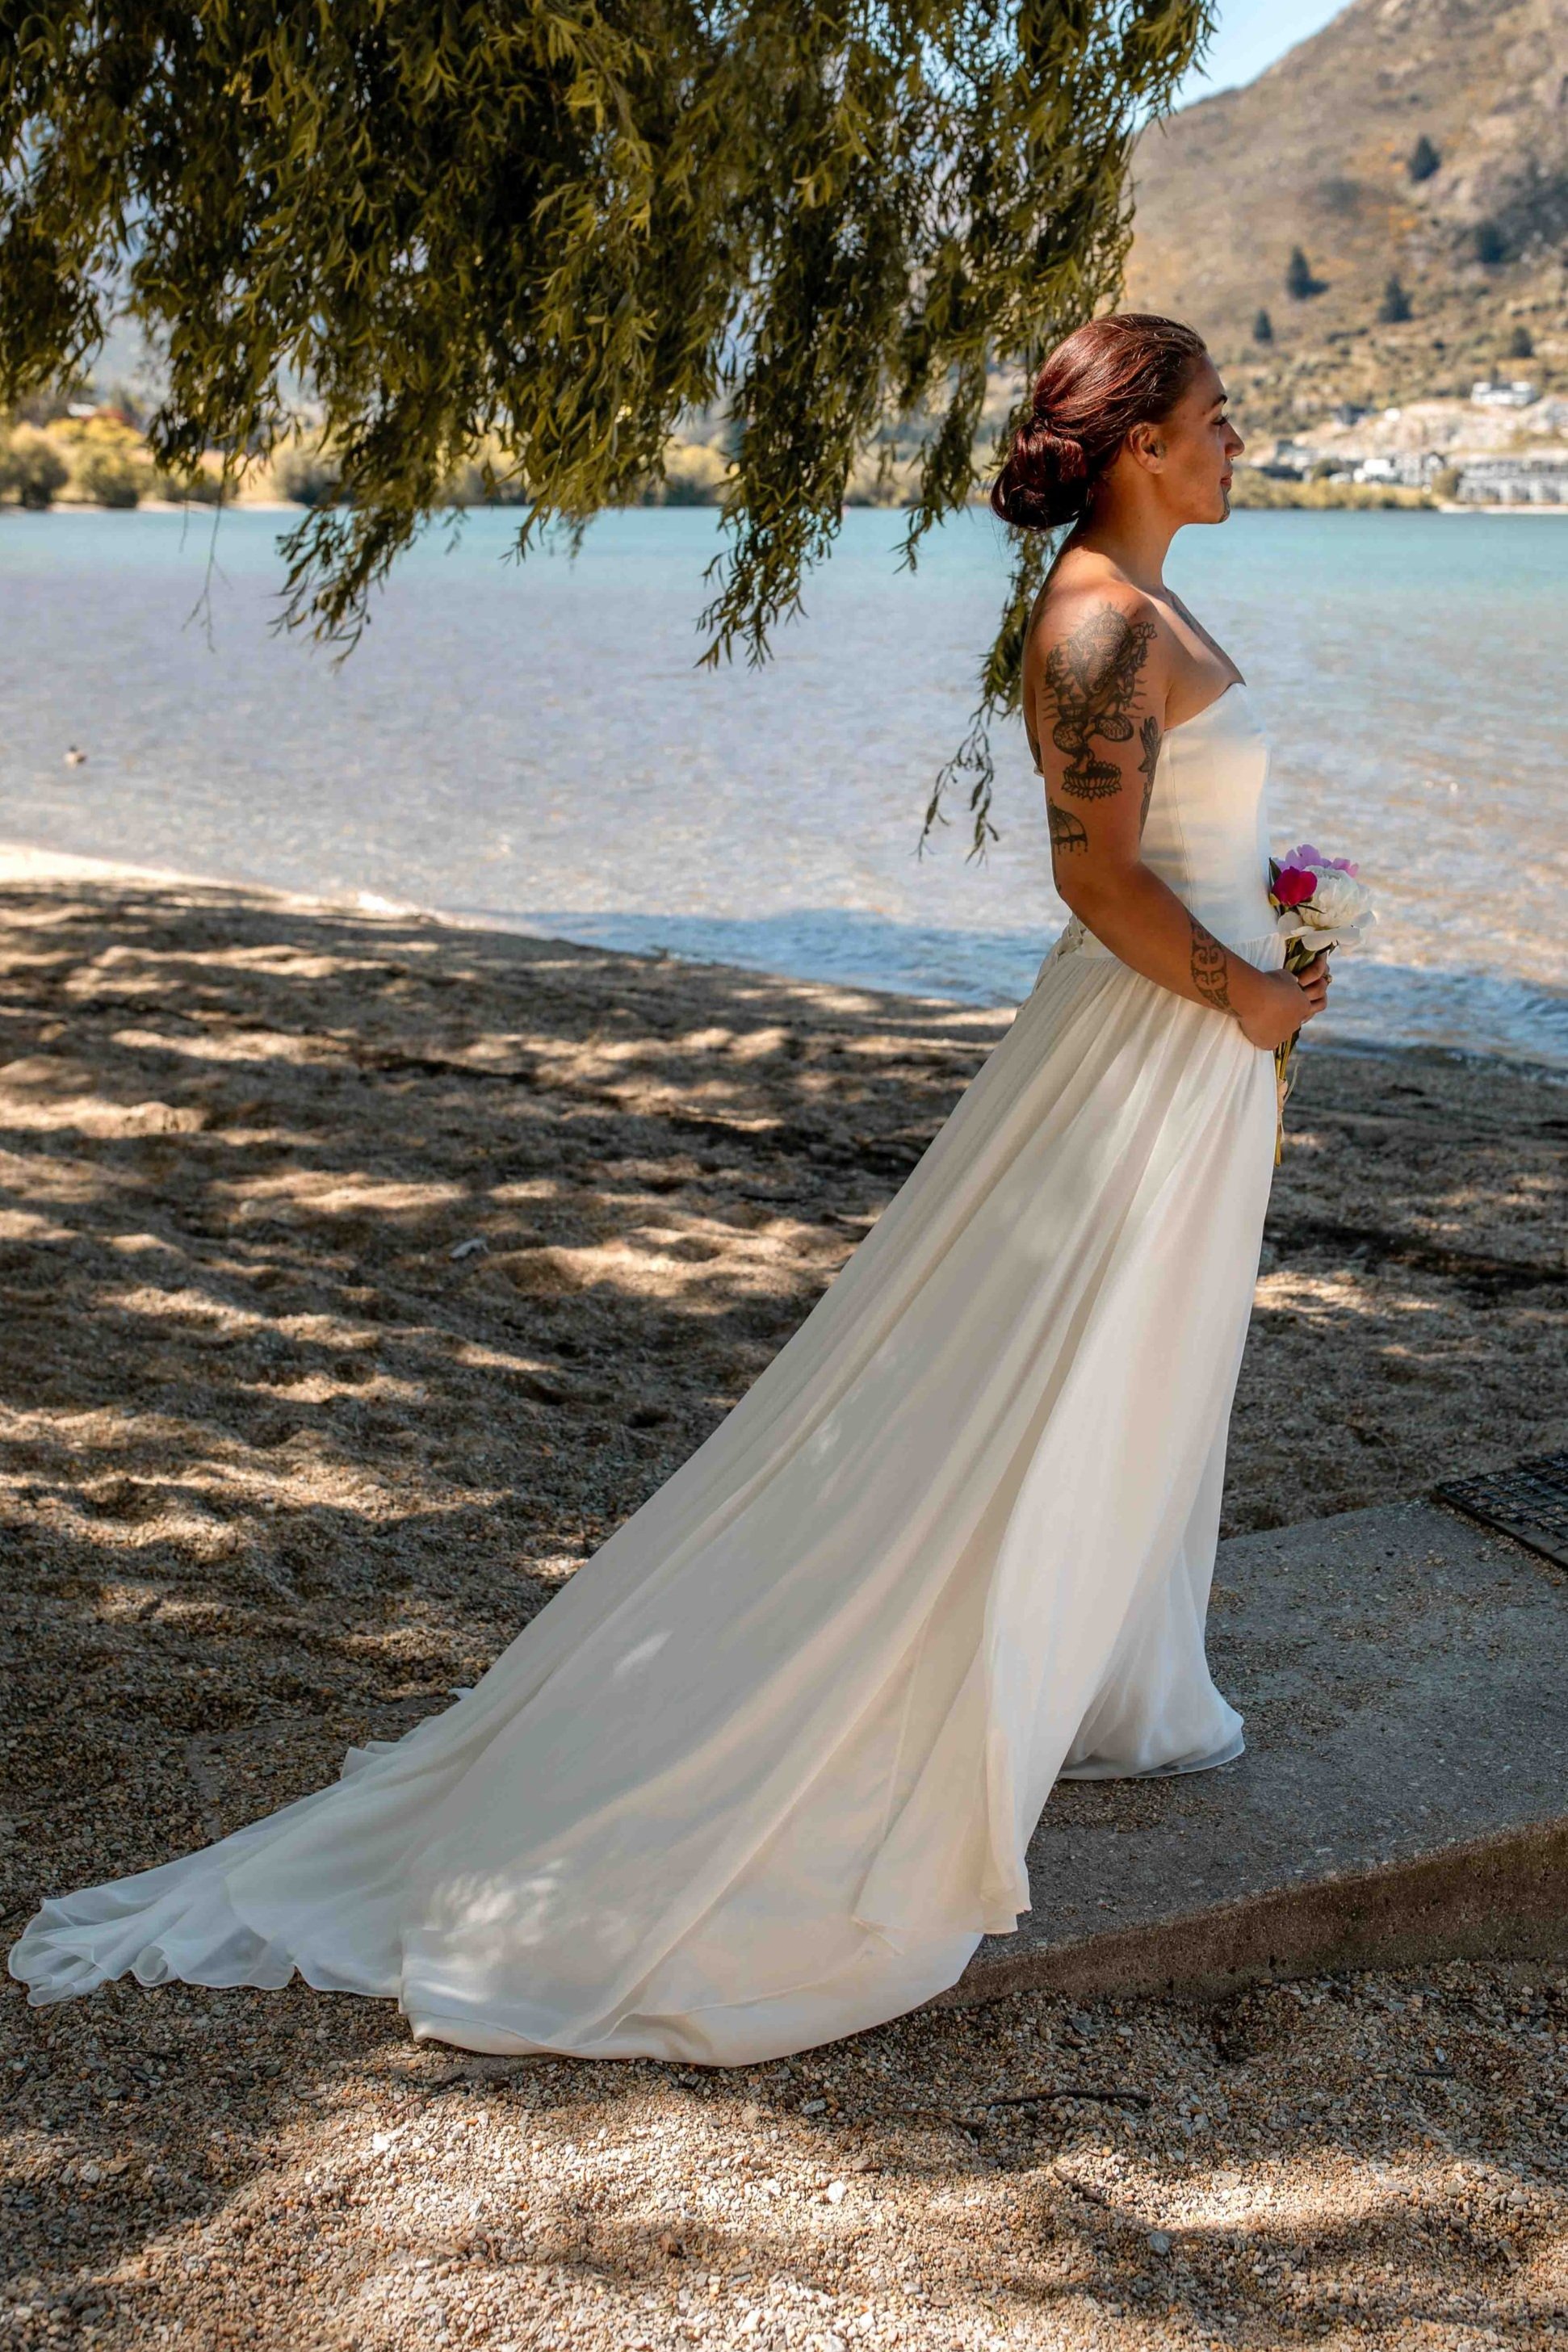 Charlotte+Dress+-+Nemo+Bridal+Couture+Queenstown+New+Zealand+0V9A3298.jpg